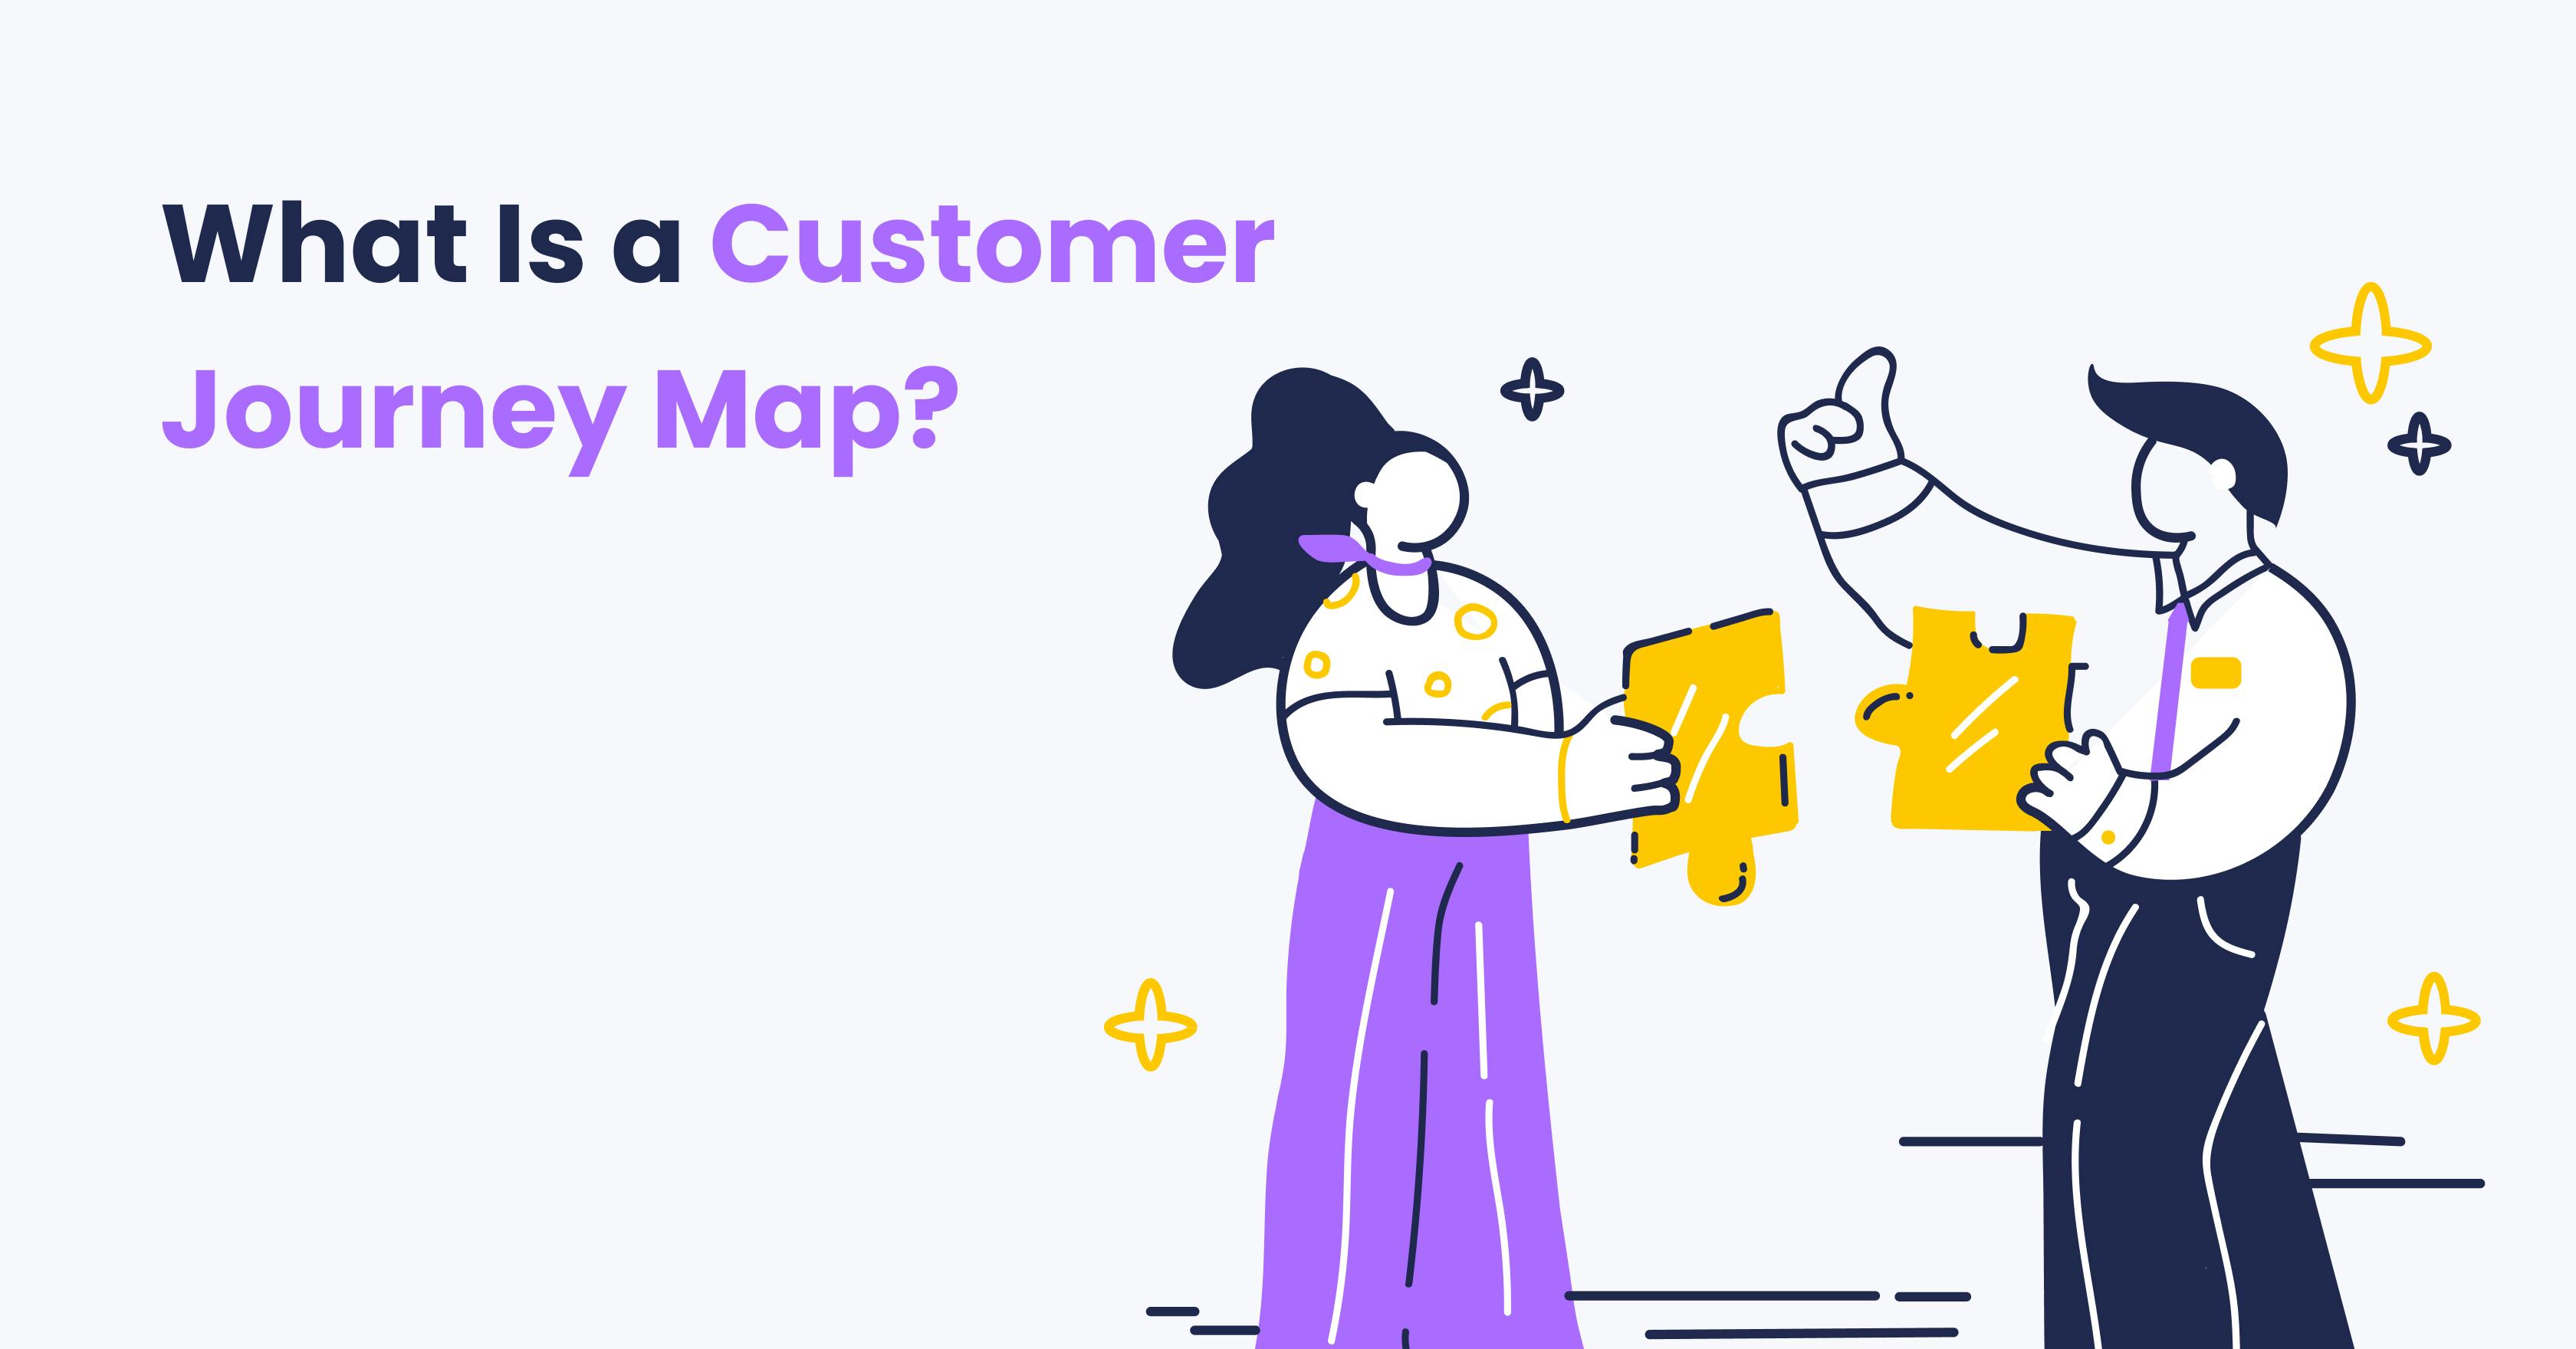 Nightborn - What is a Customer Journey Map?